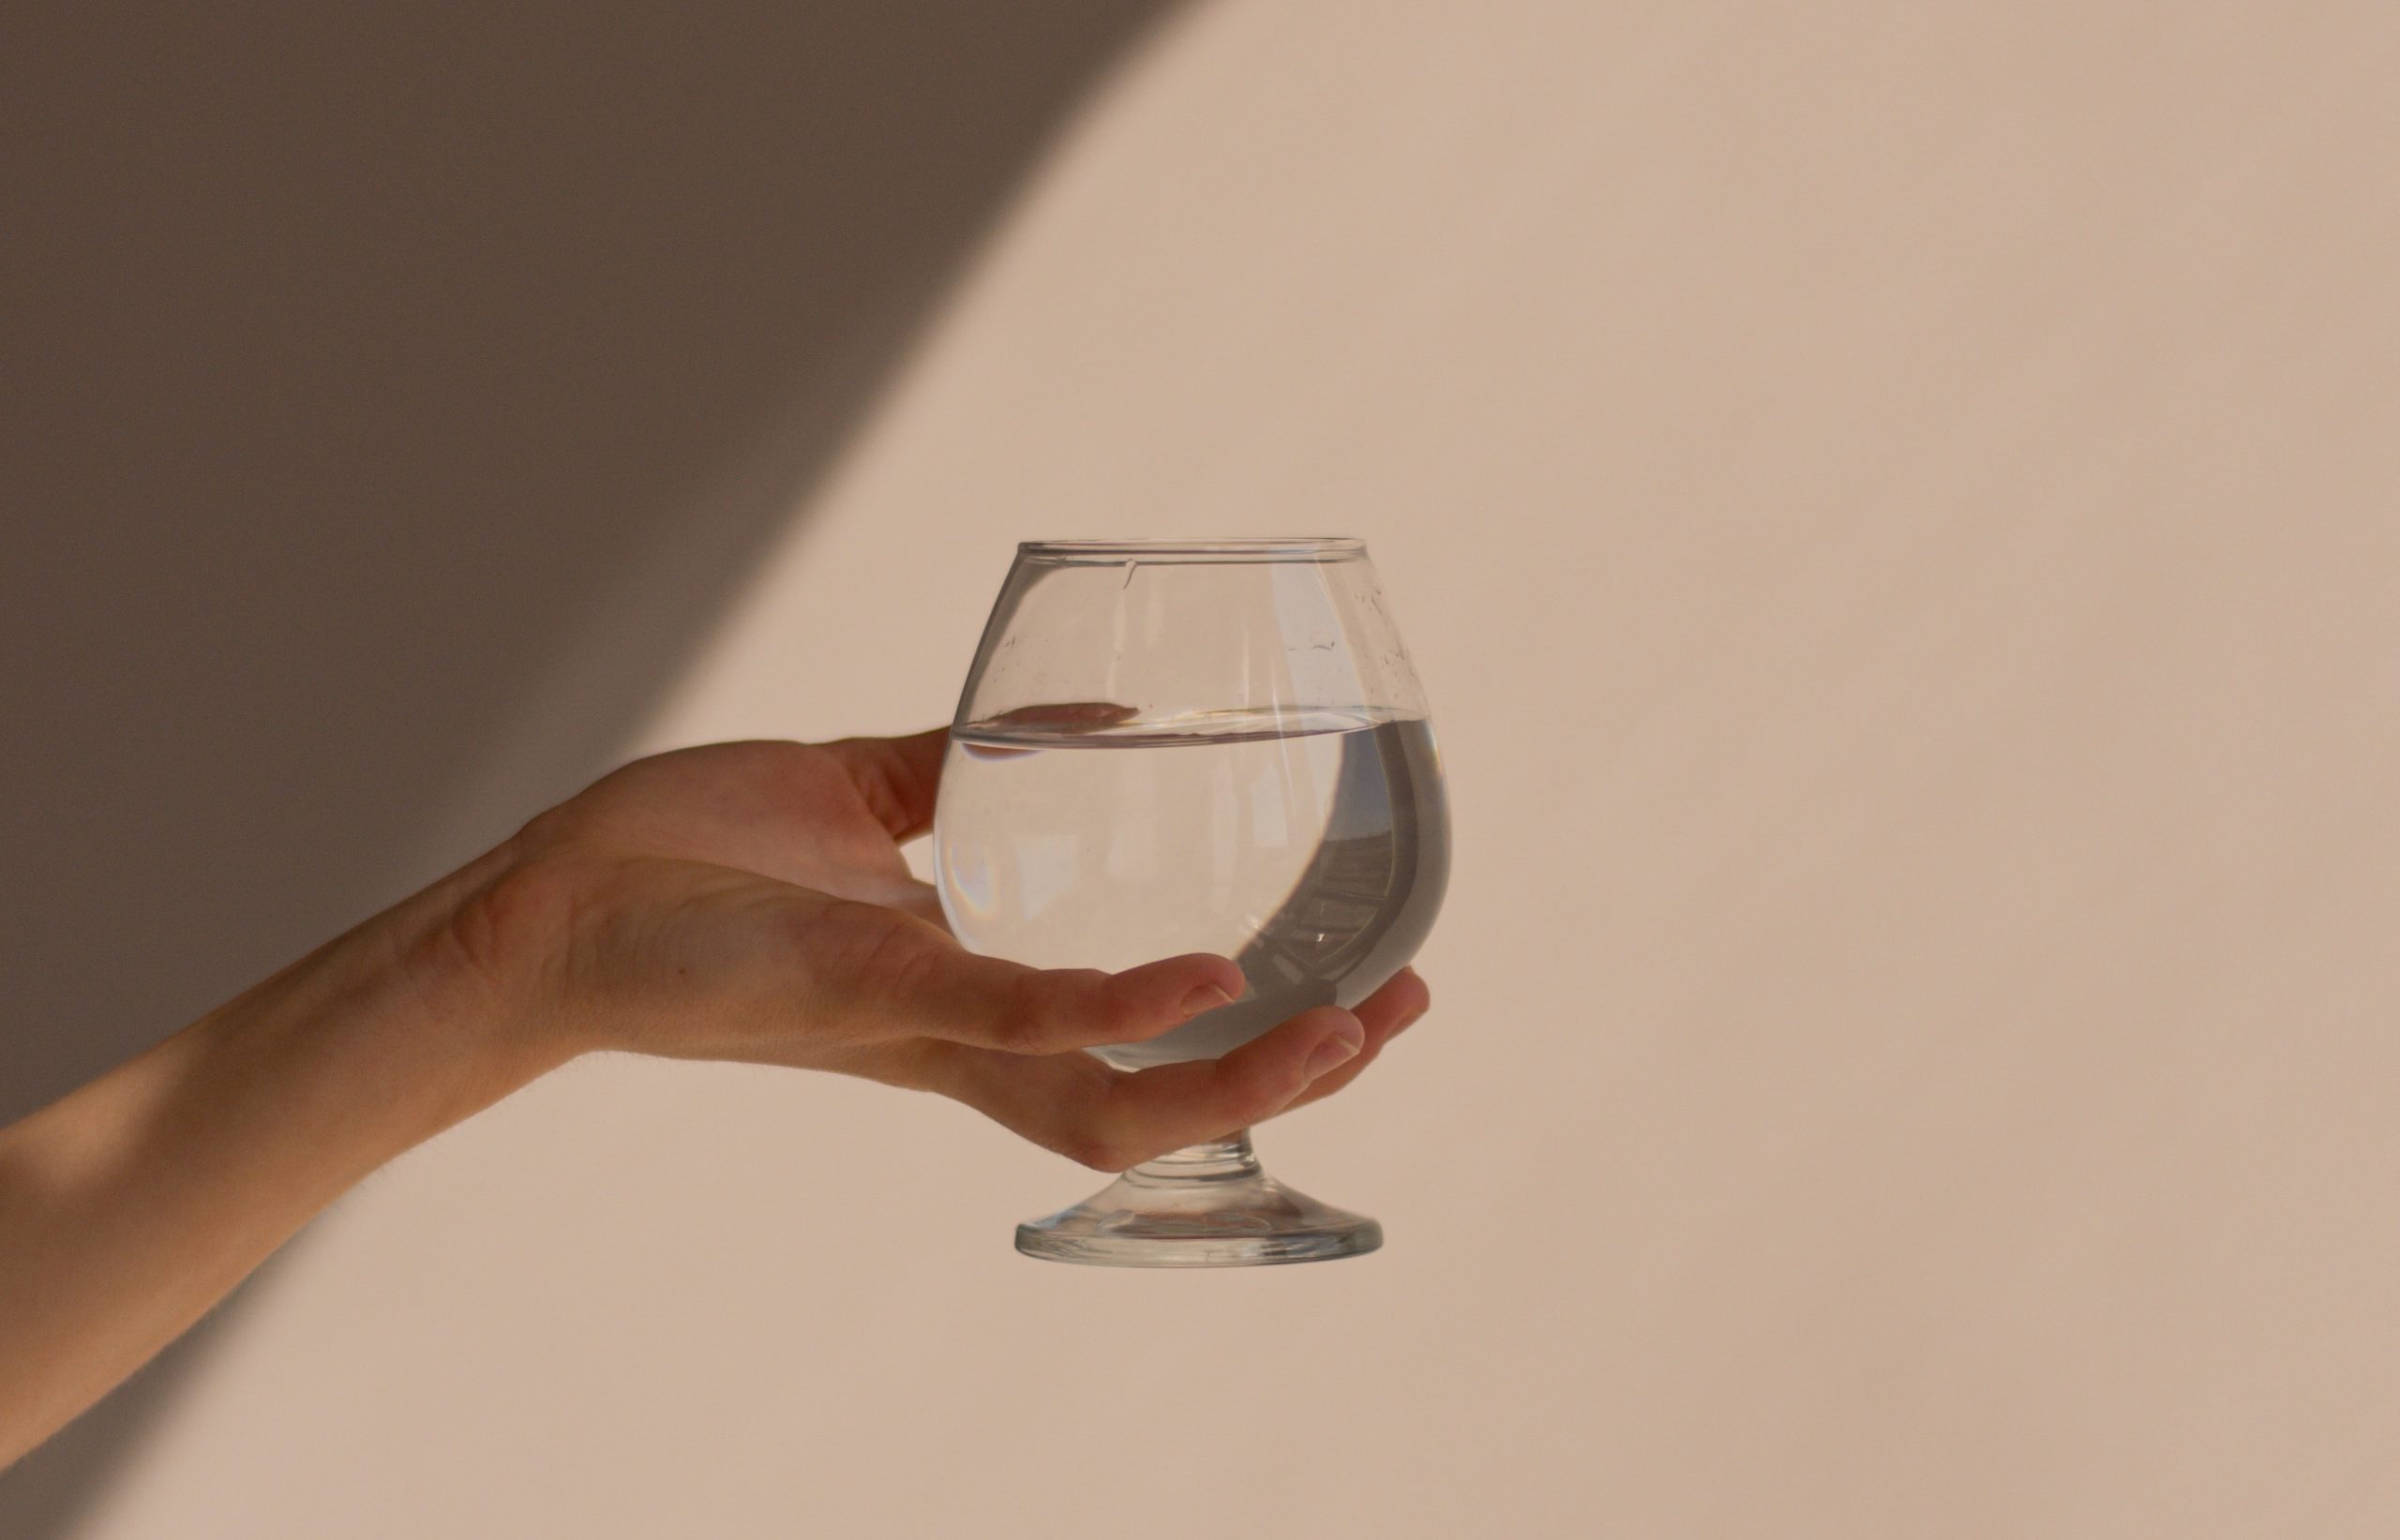 part-time maid - hand holding transparent cup